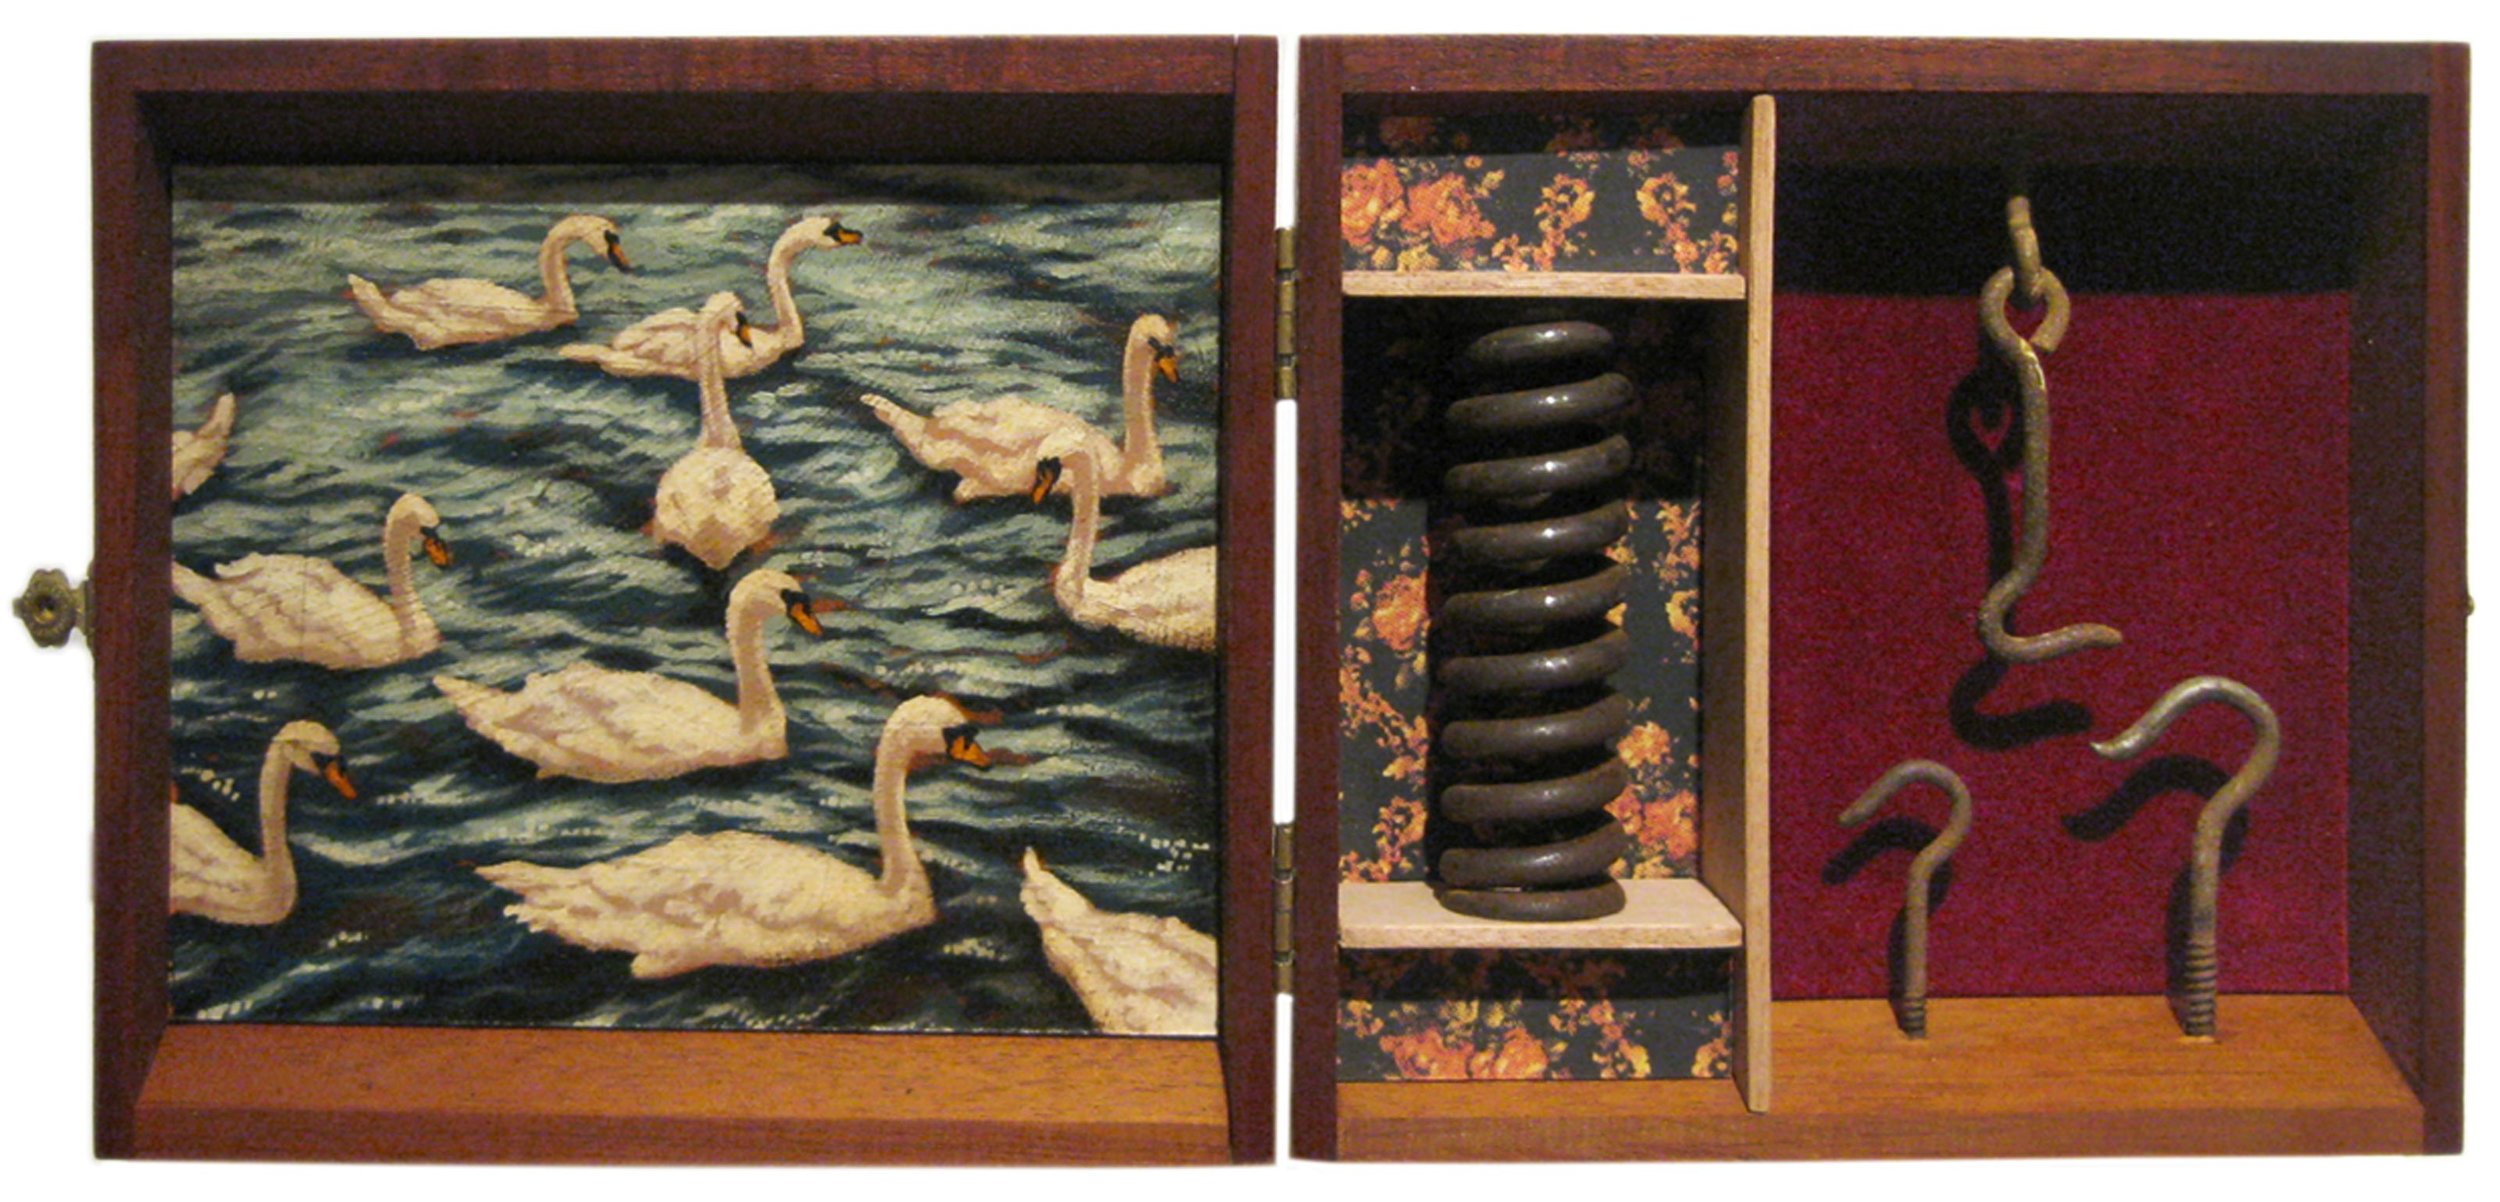    Veneer and Turpentine   Mixed Media Cigar Box Installation 15in x 6.75in x 3in deep 